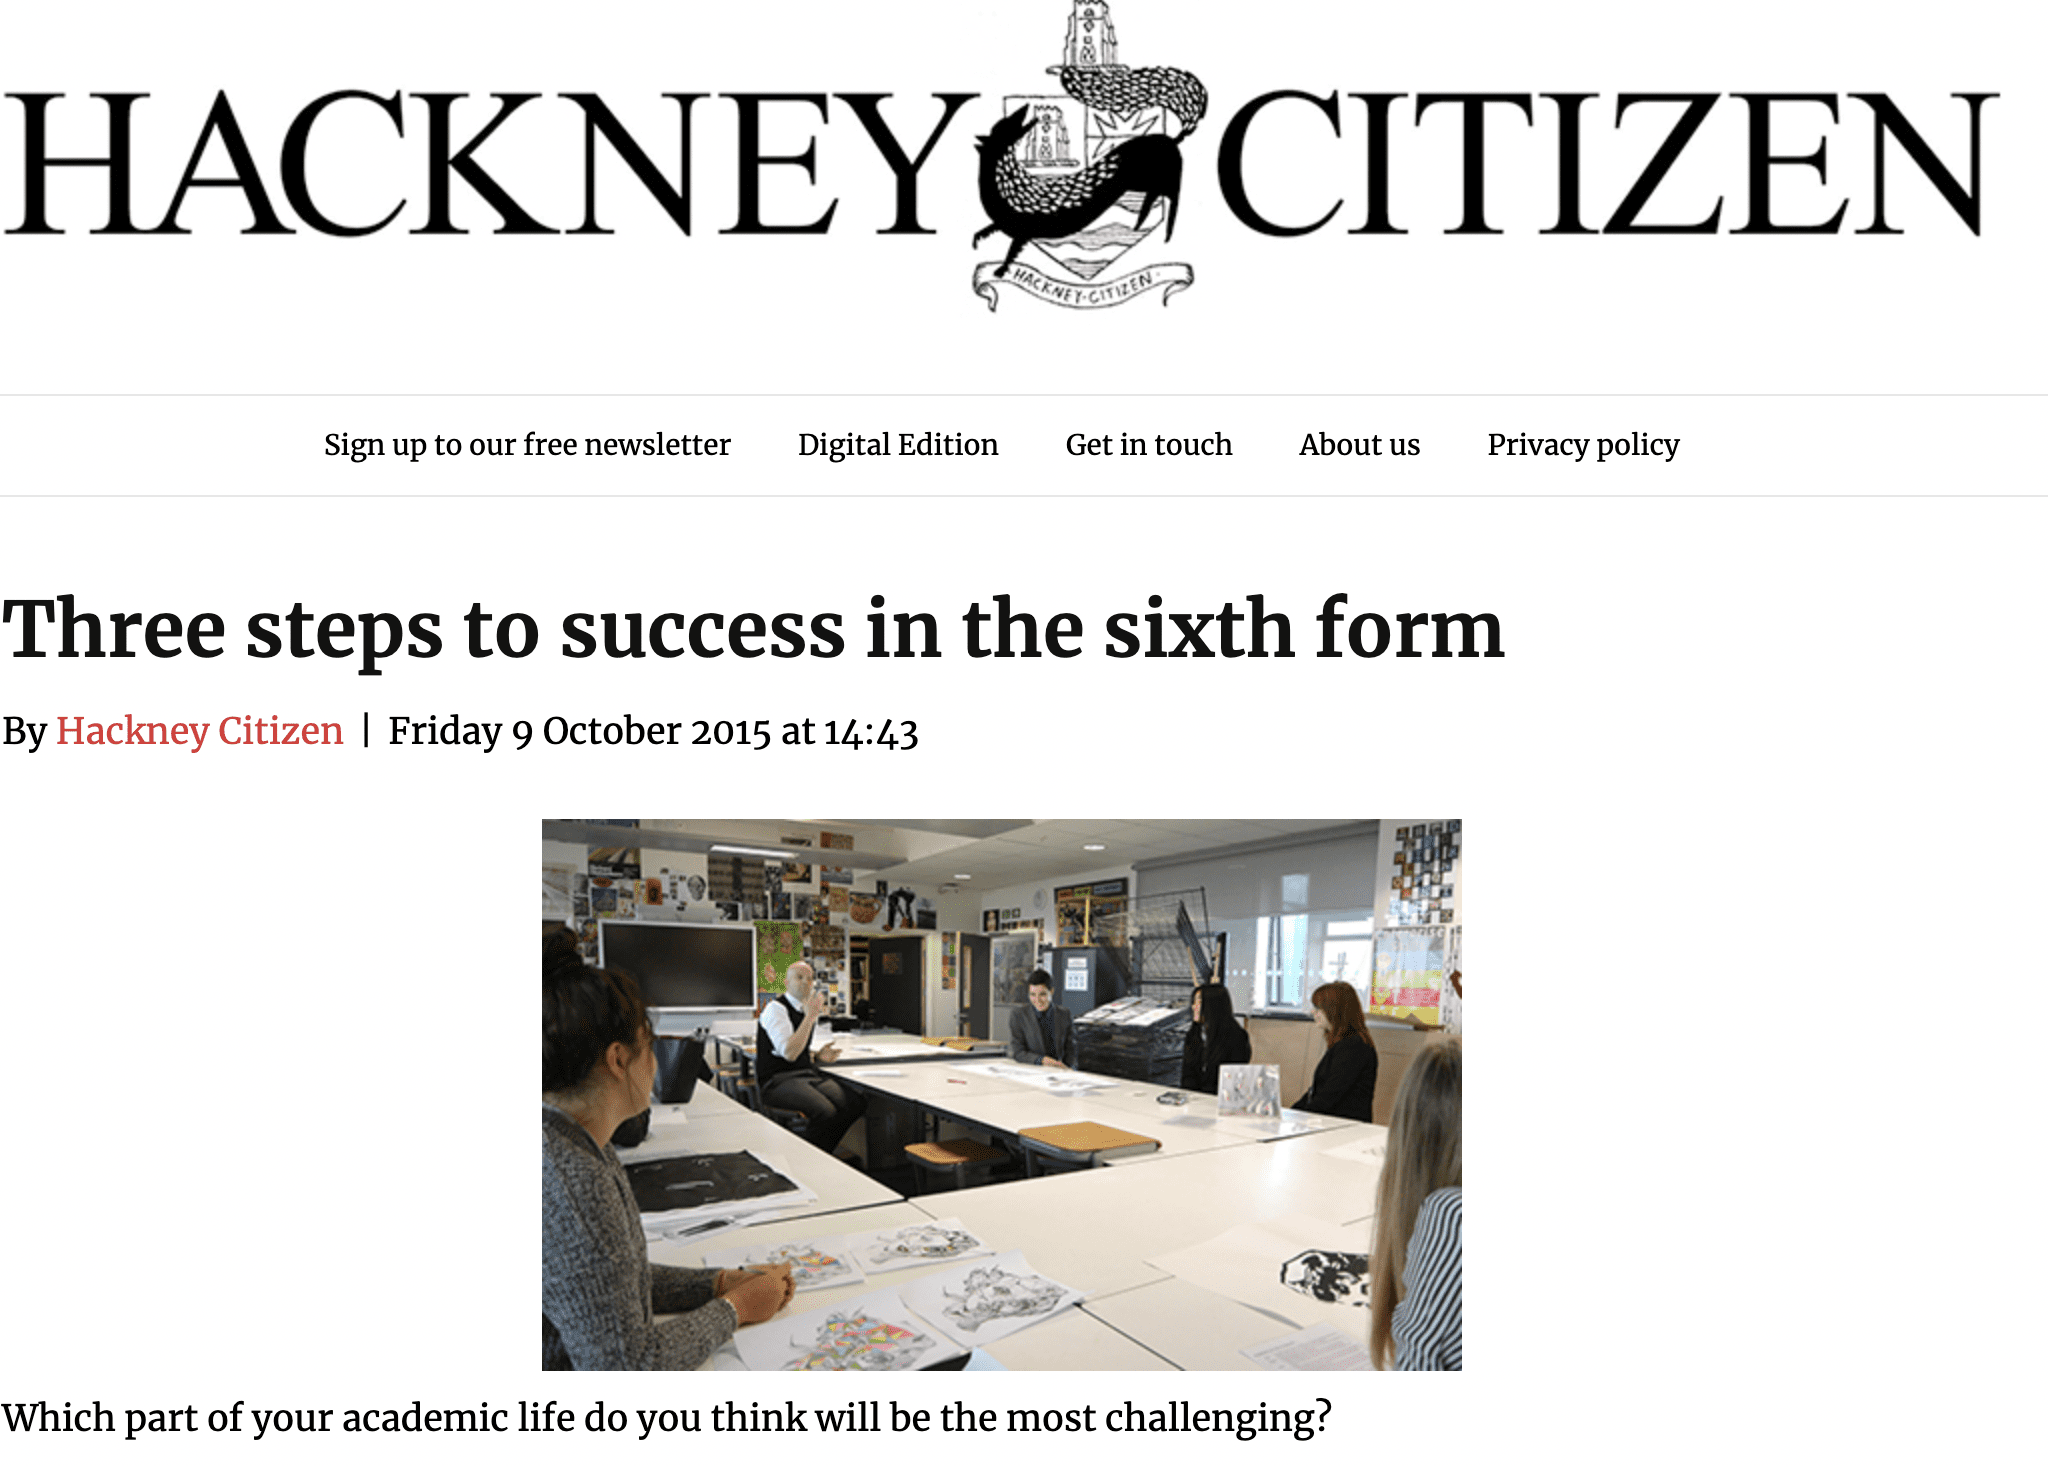 Hackney Citizen - October 2015

Many moons ago, Gina wrote an article for a local newspaper, the Hackney Citizen Three Steps to Success in the Sixth Form and while that was a long time ago now, the majority of the advice is as relevant today as it was then.